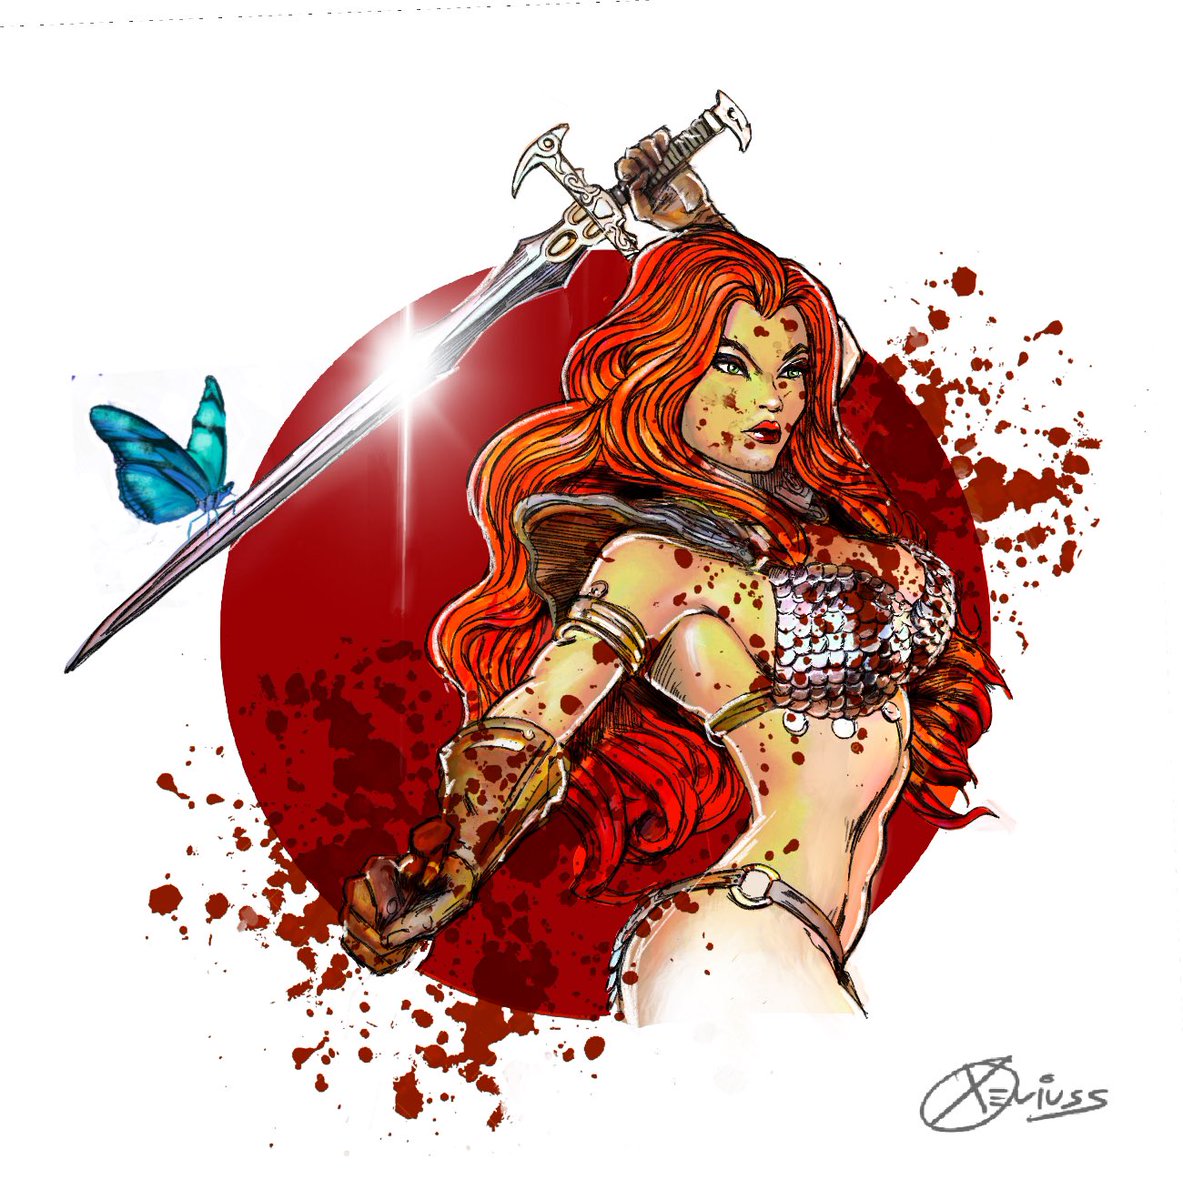 Seeing as we are discussing King Charles, butterflies, portraiture and the colour red. A recent Red Sonja commission, painted by me. ❤️ Enjoy!